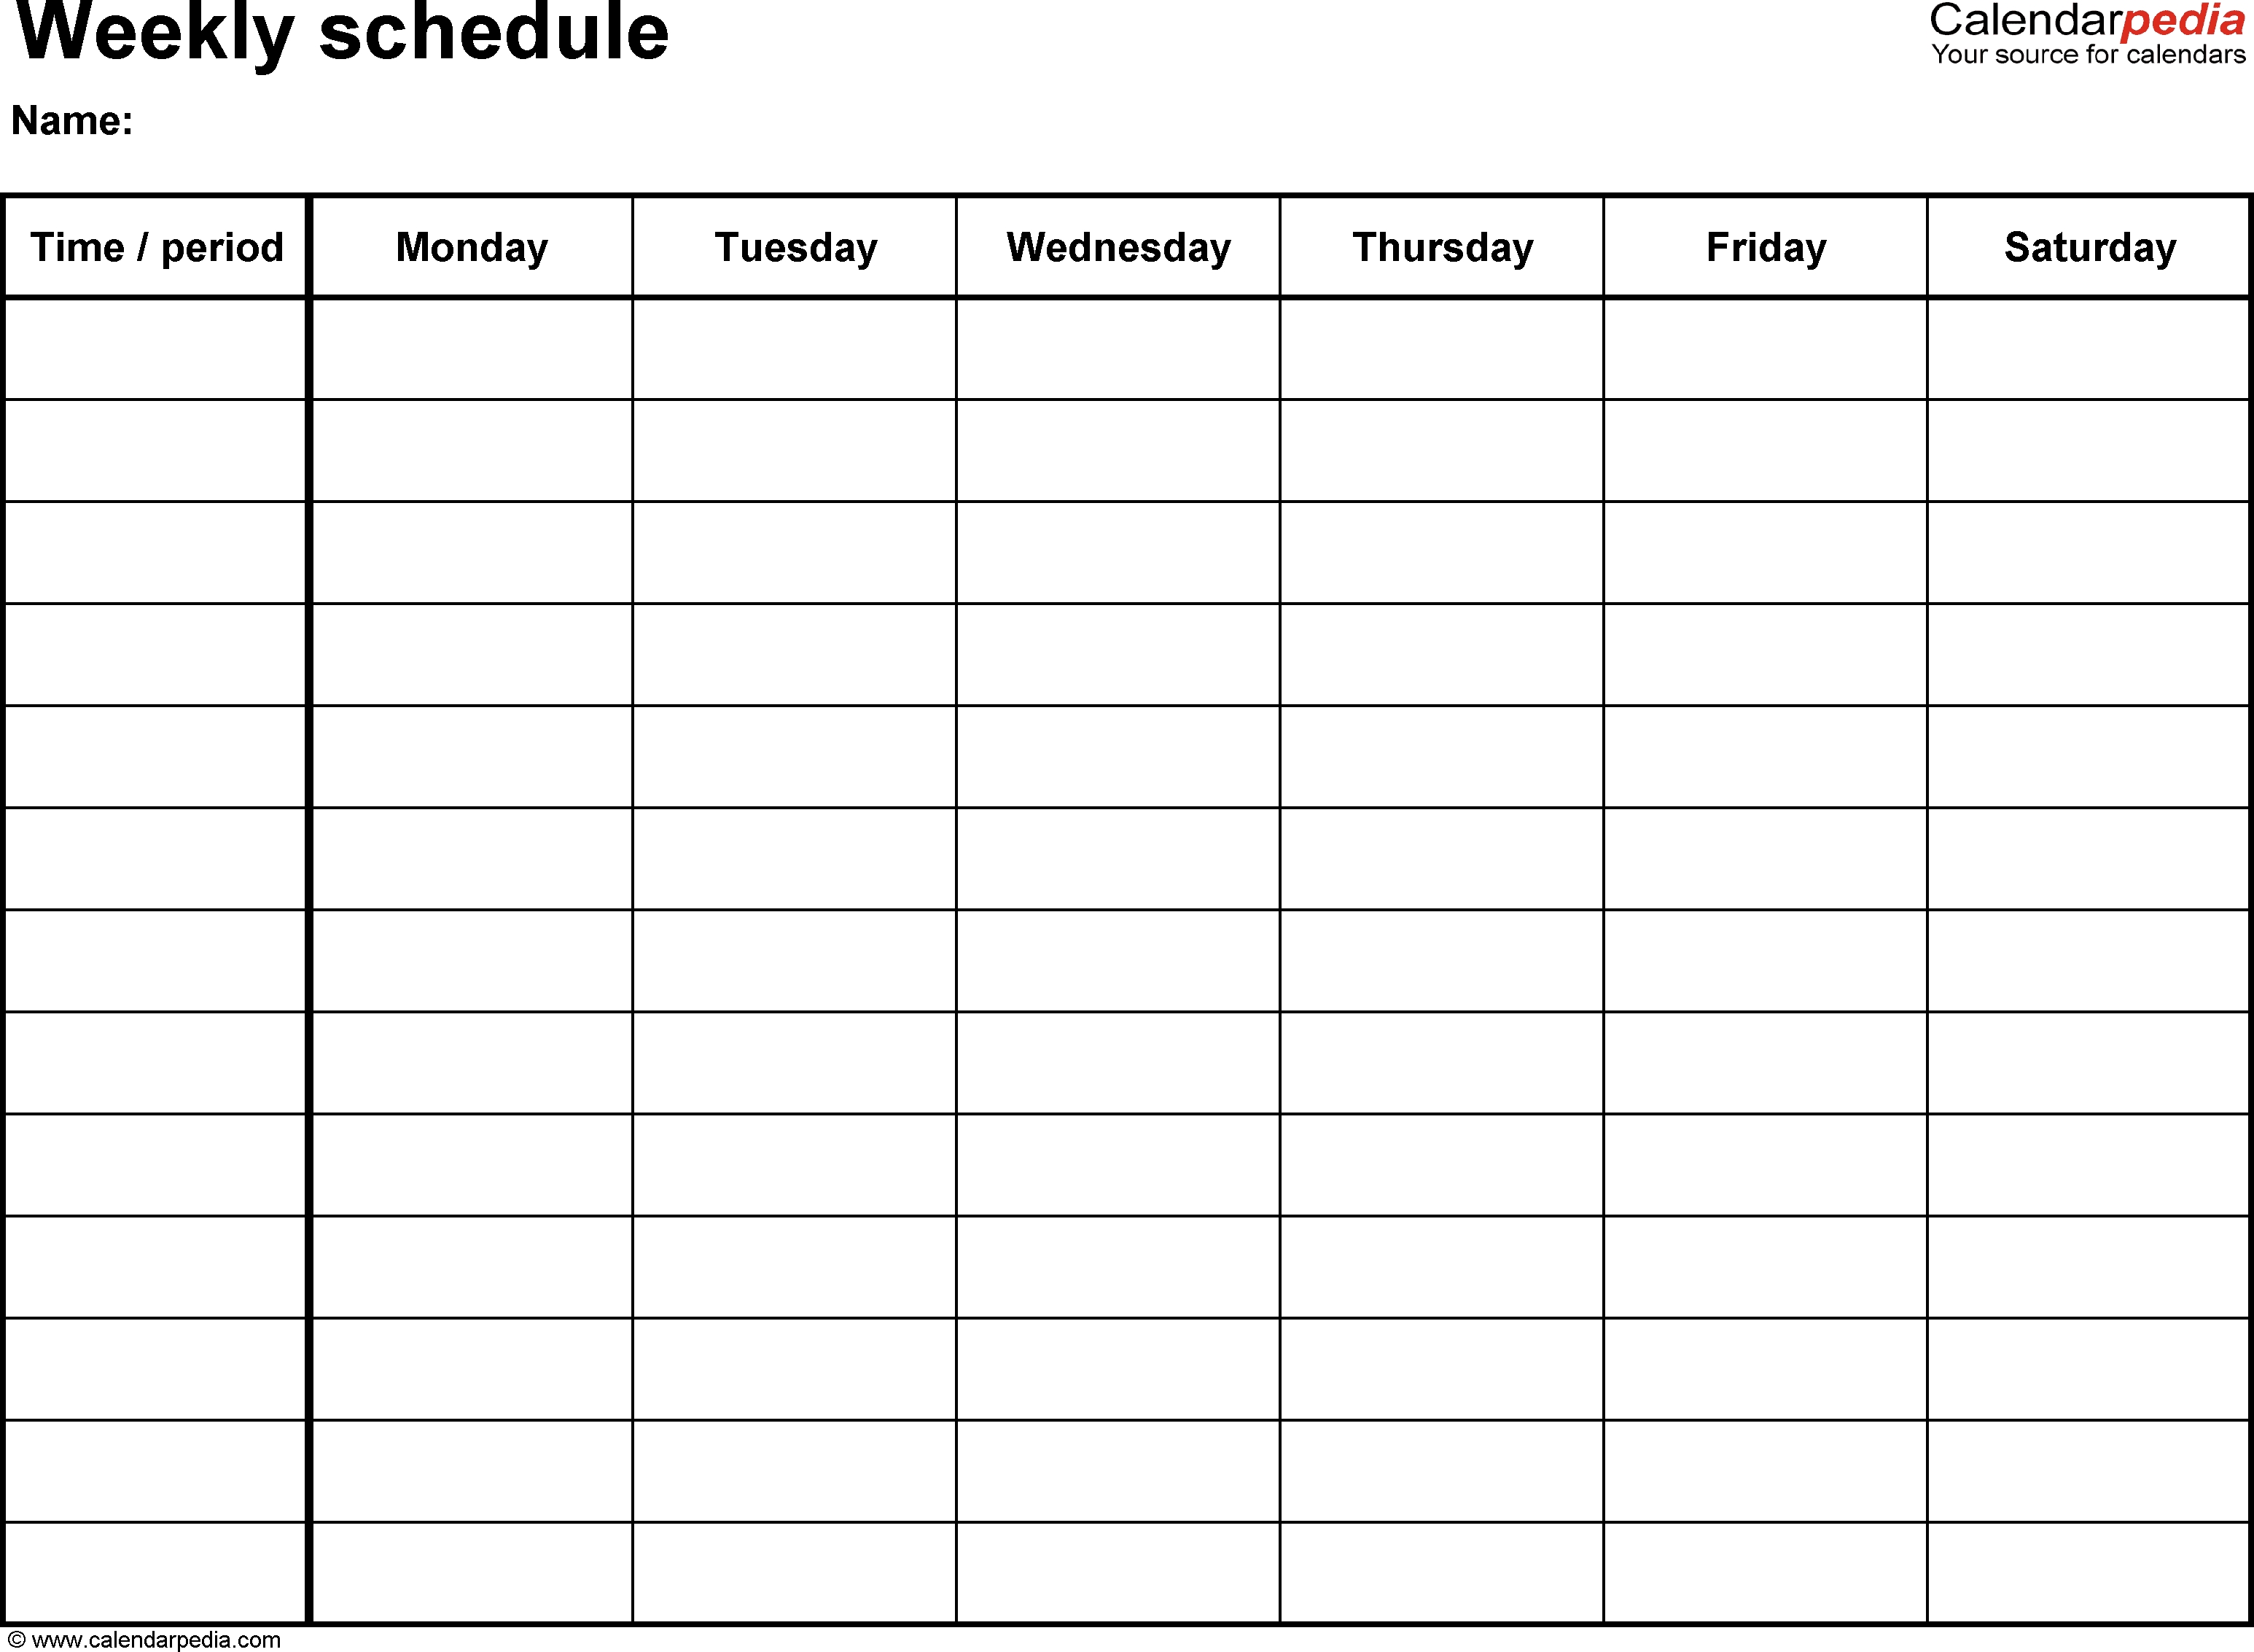 Free Weekly Schedule Templates For Word - 18 Templates pertaining to Template For Monday Through Friday School Schedule